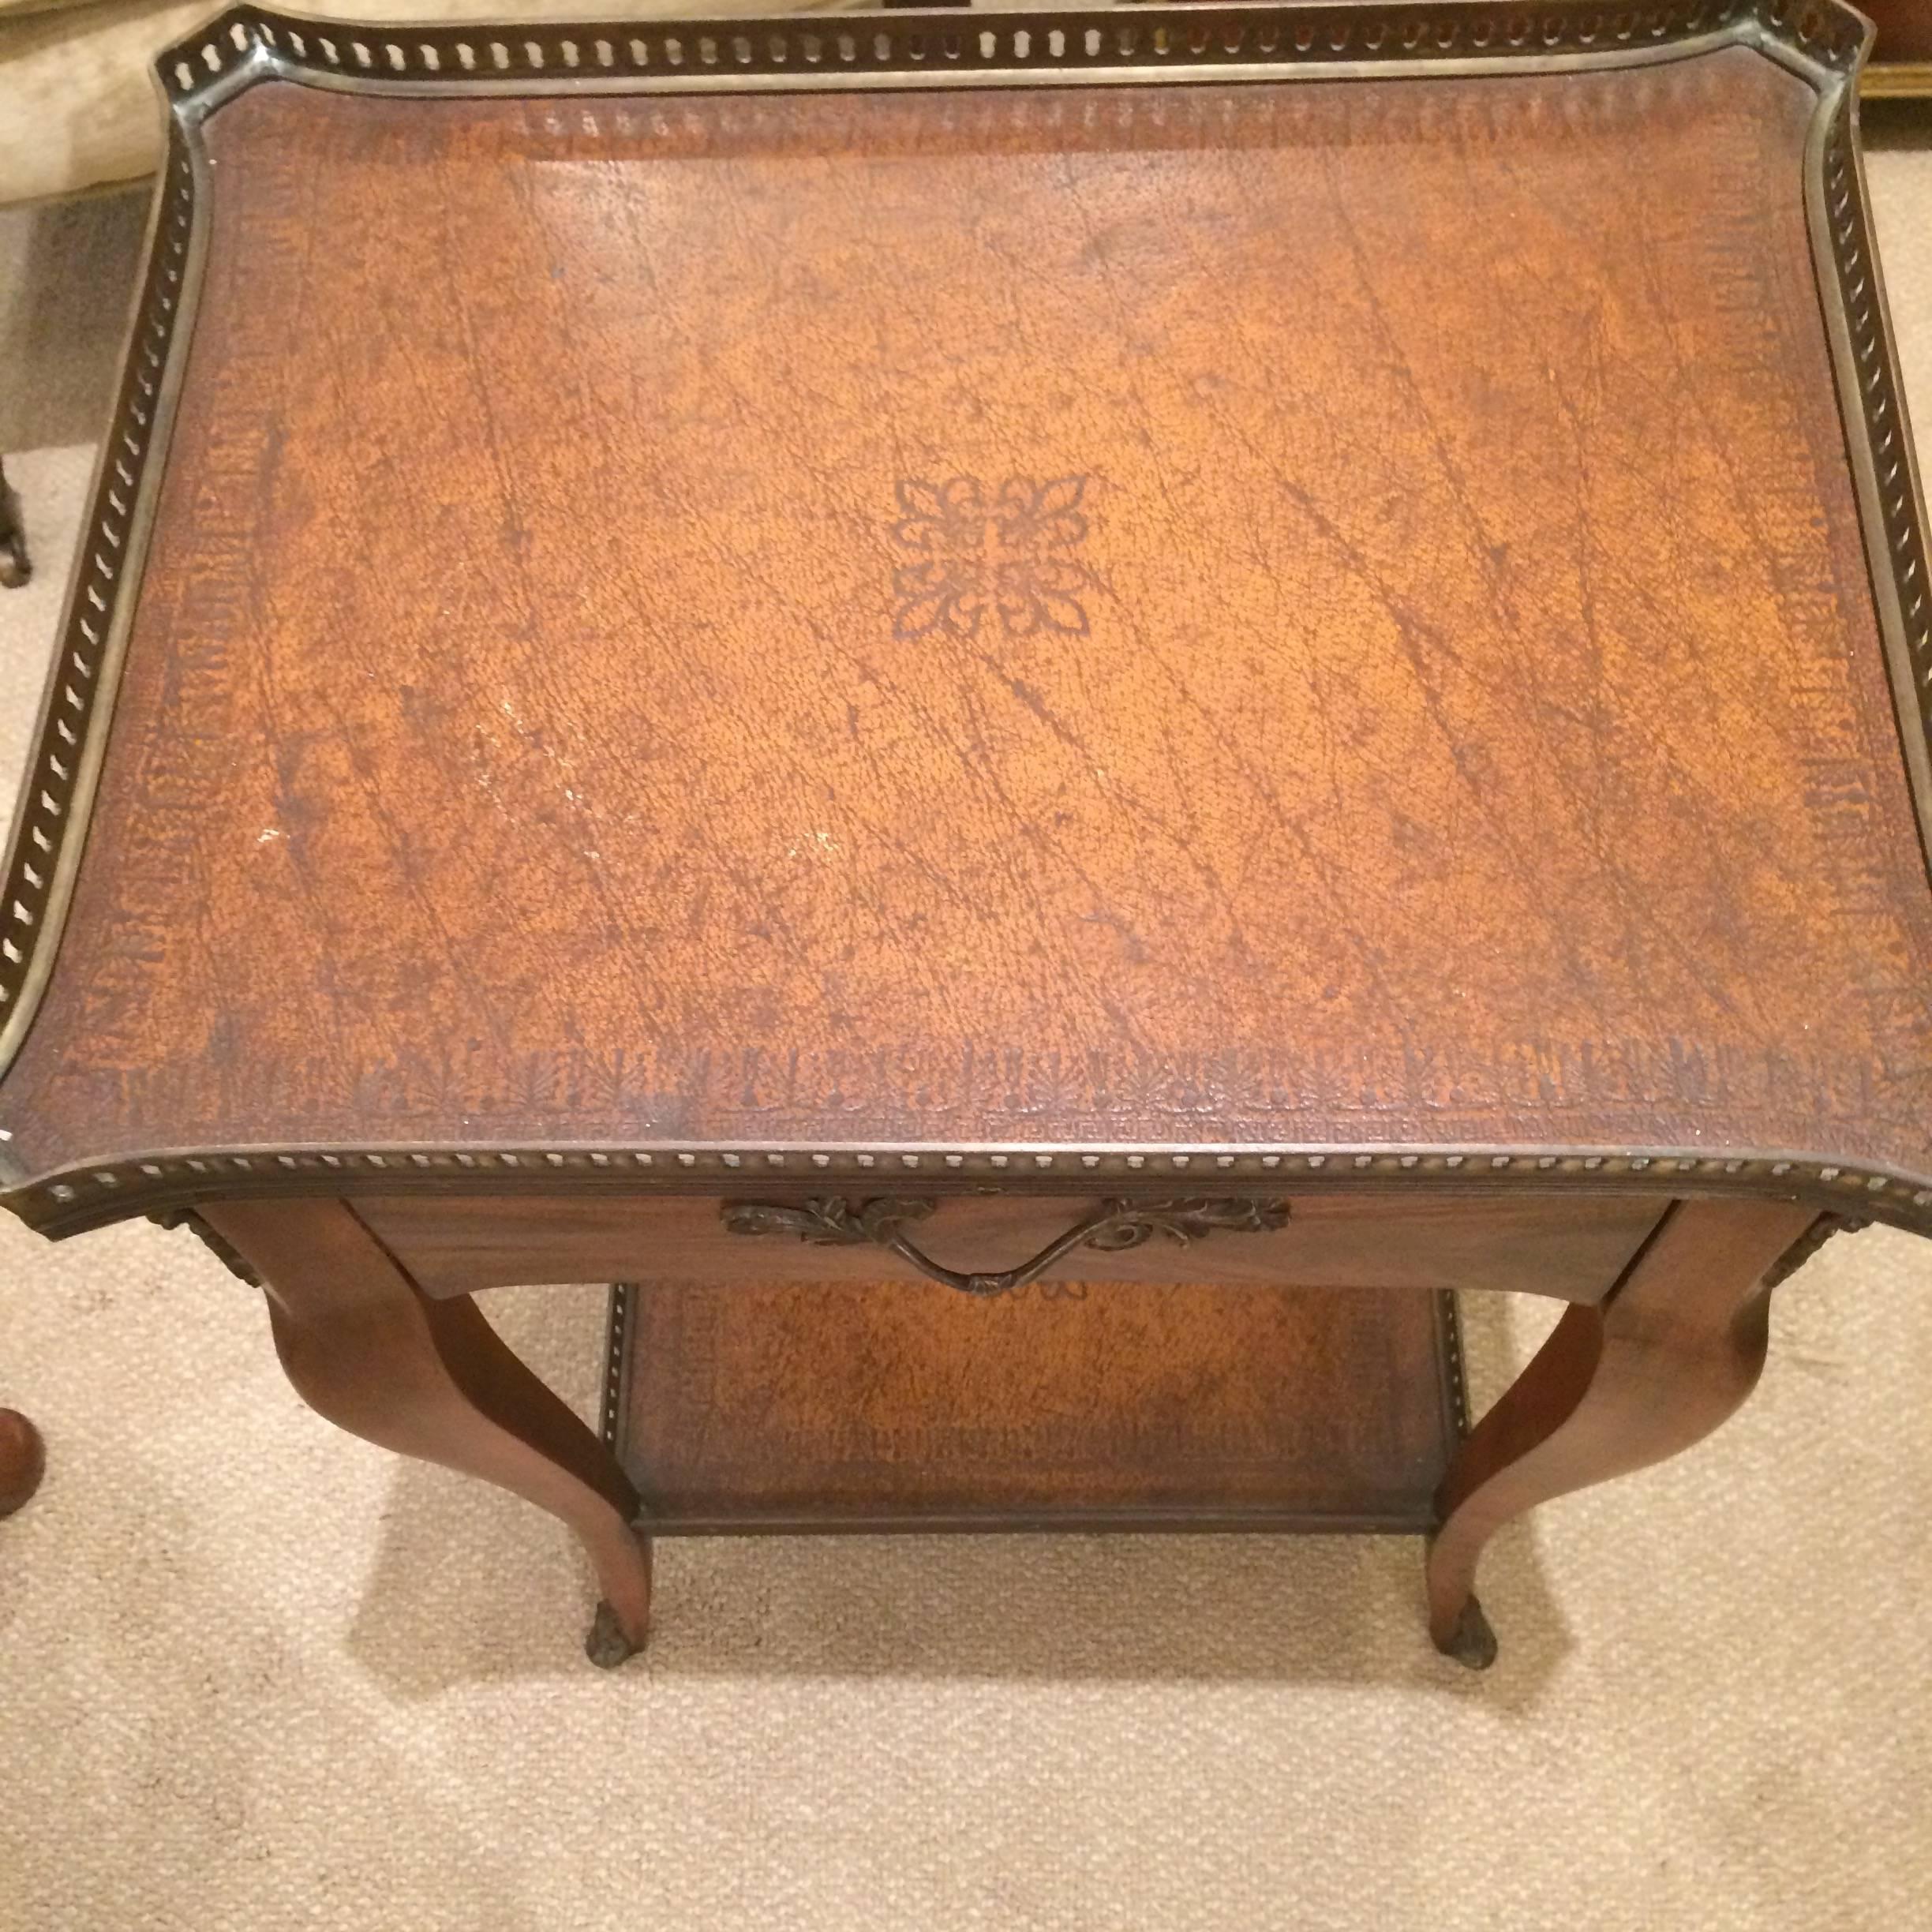 Handsome little traditional mahogany side table with two tooled leather tiers, bordered by brass galleries, with elegant curved legs with capped feet and a fancy curlicue handle on the single drawer.